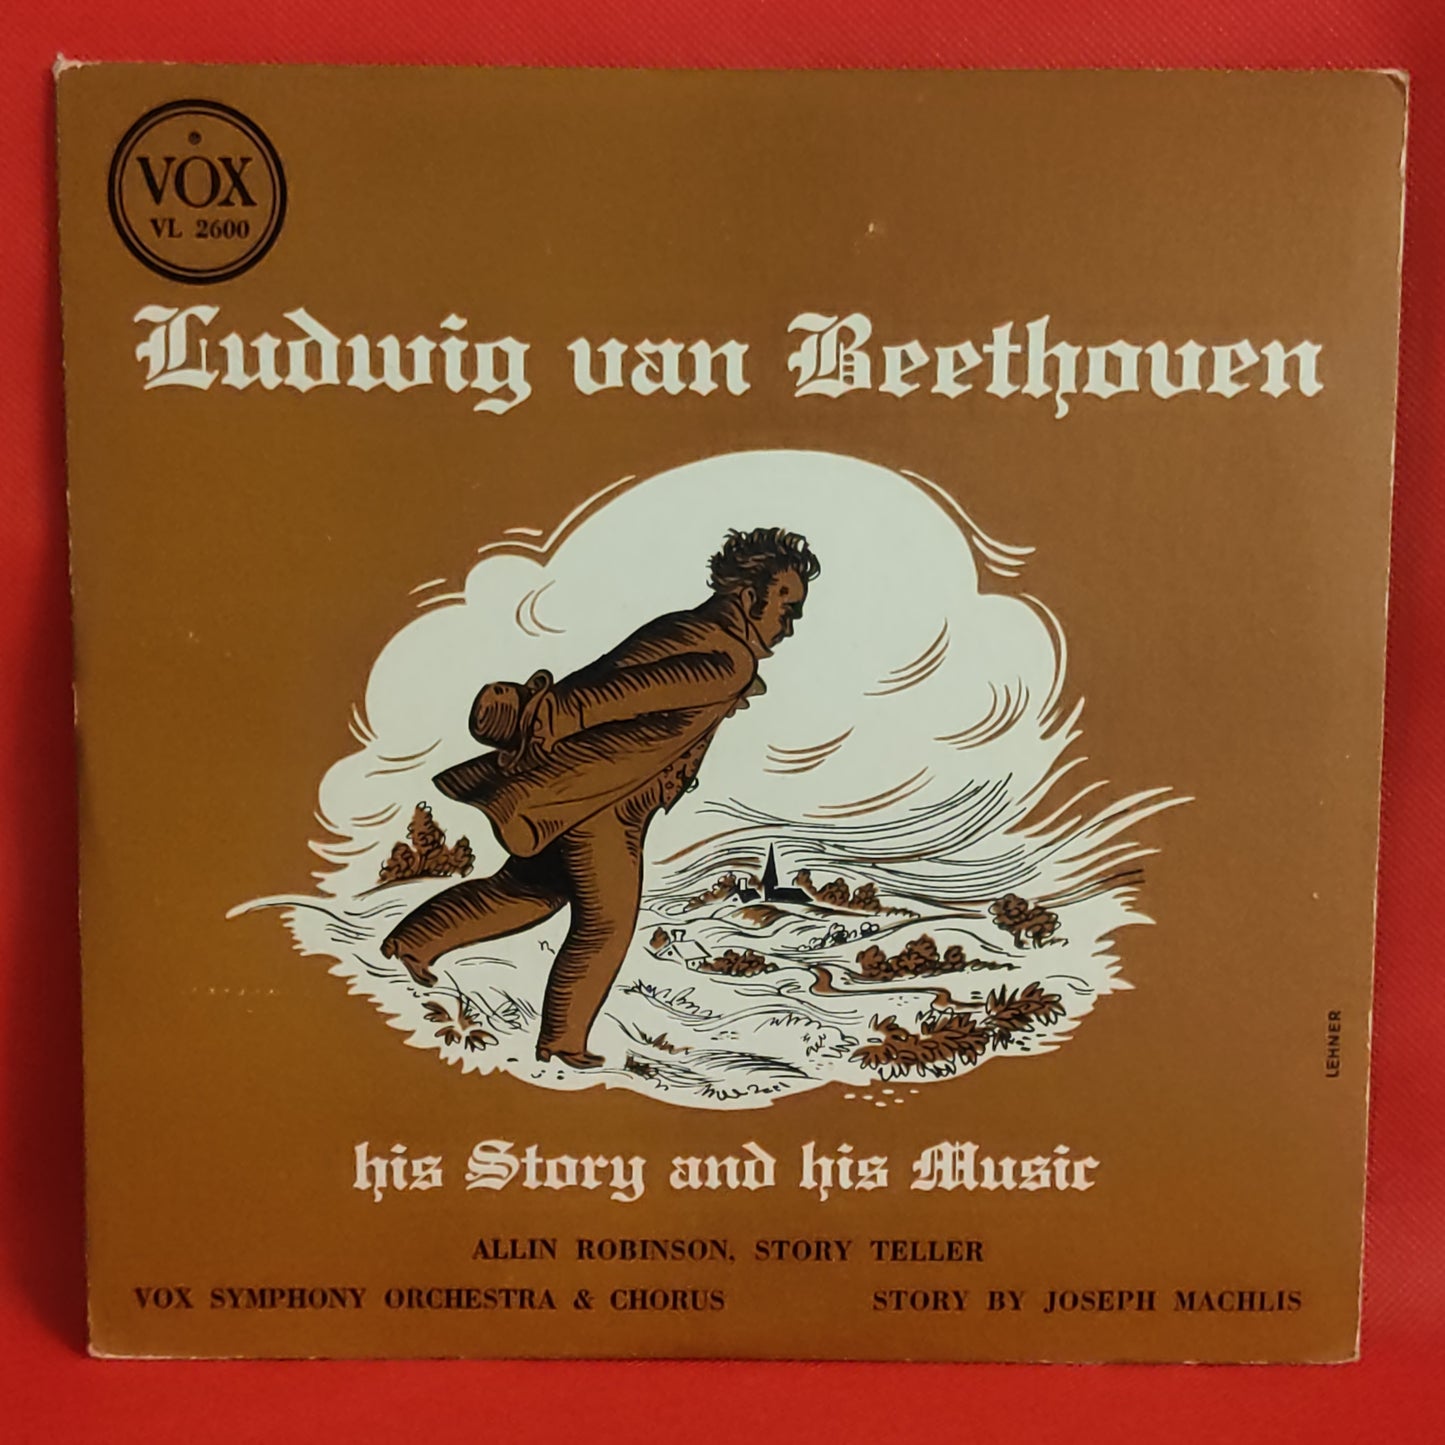 Ludwing van Beethoven - his story and his music